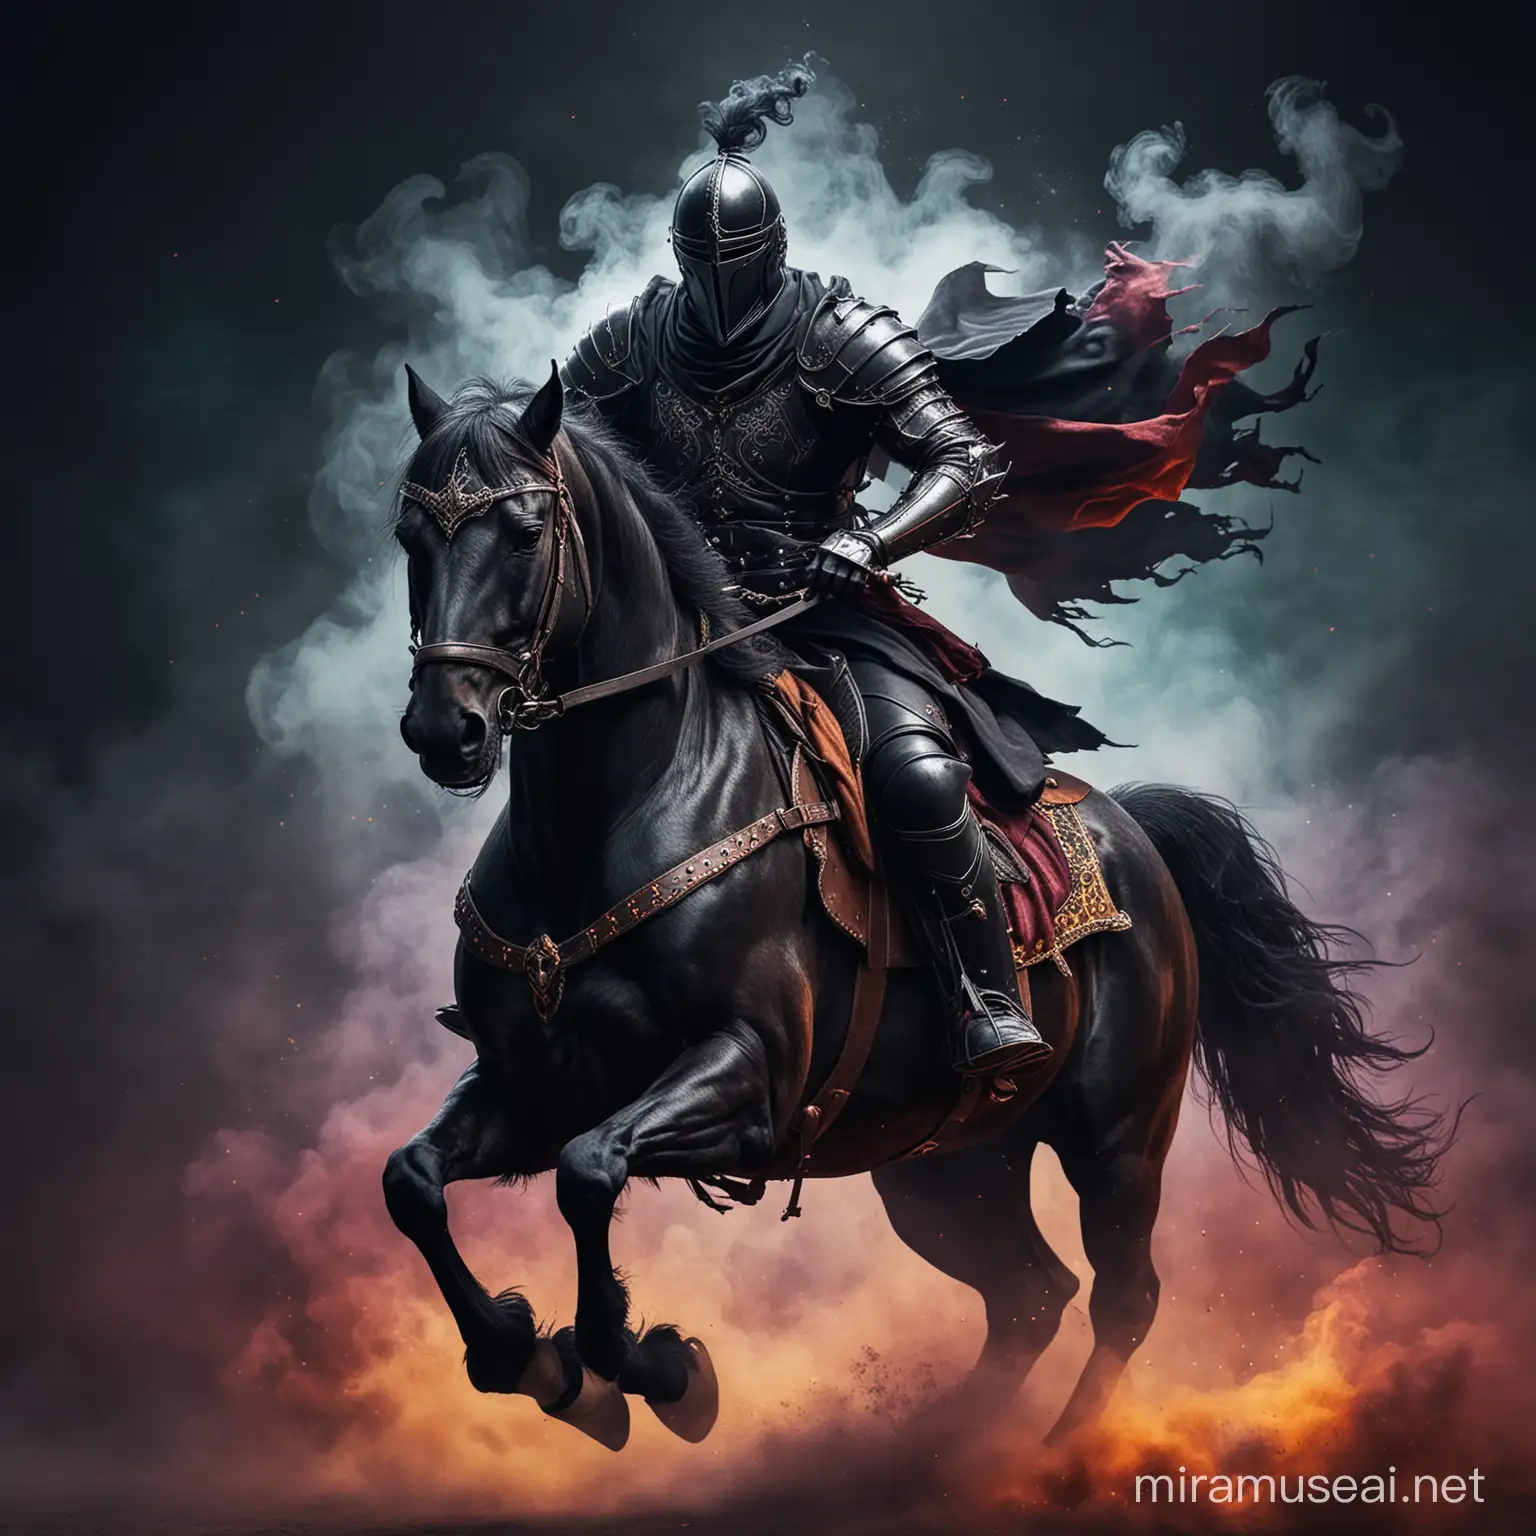 A black evil knight, dark colorful background, smoke, riding a horse